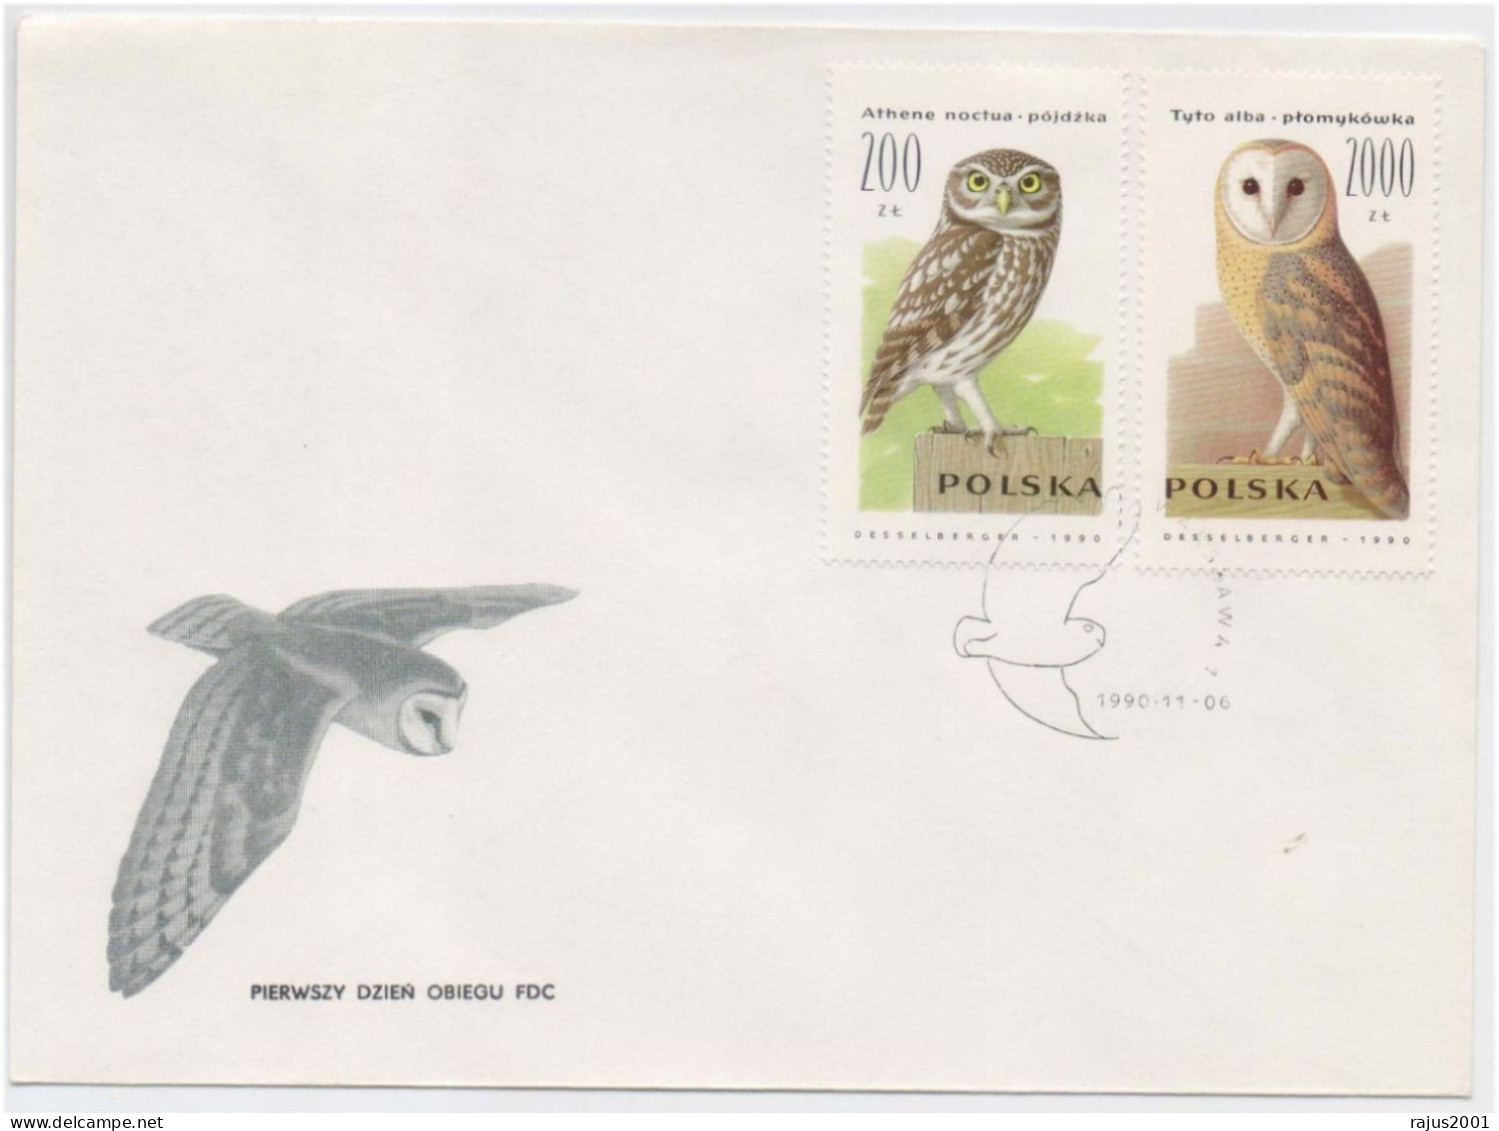 Barn OWL, Little OWL, OWLS, Hibou, Eule, Uil, Birds, Bird, Animal, Pictorial Cancellation FDC - Hiboux & Chouettes